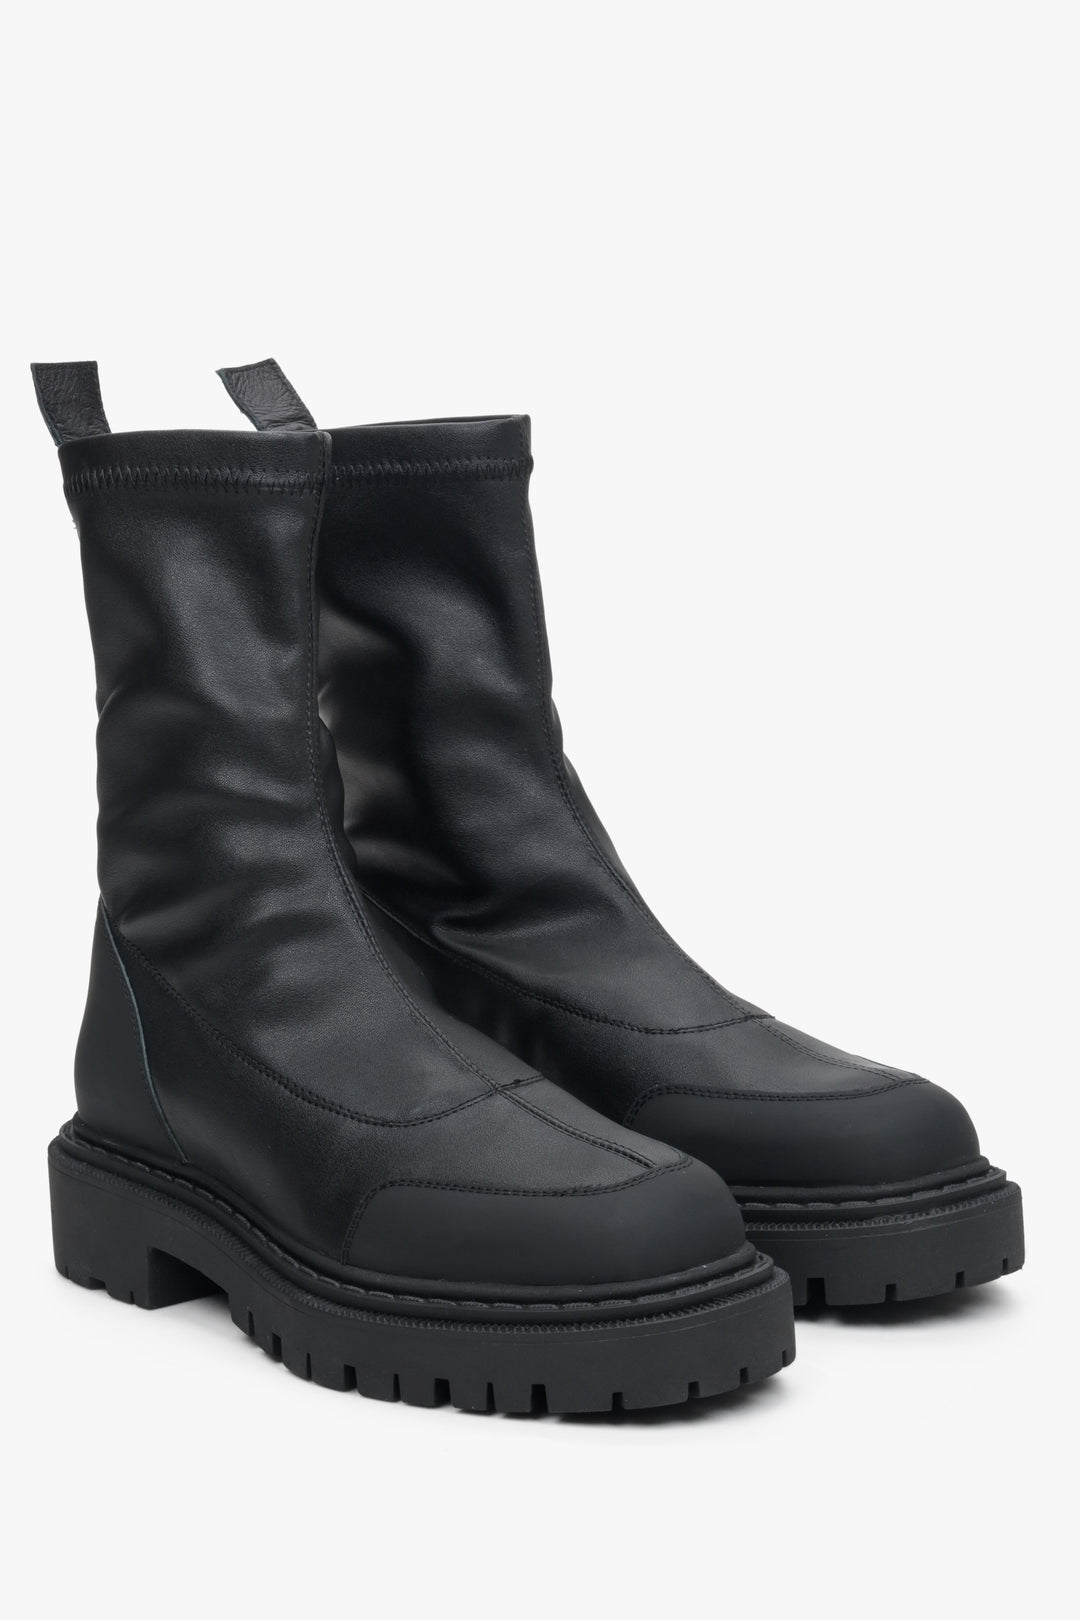 Black slip-on women's ankle boots with a flexible upper - close-up of the shoe's toe and side seam.